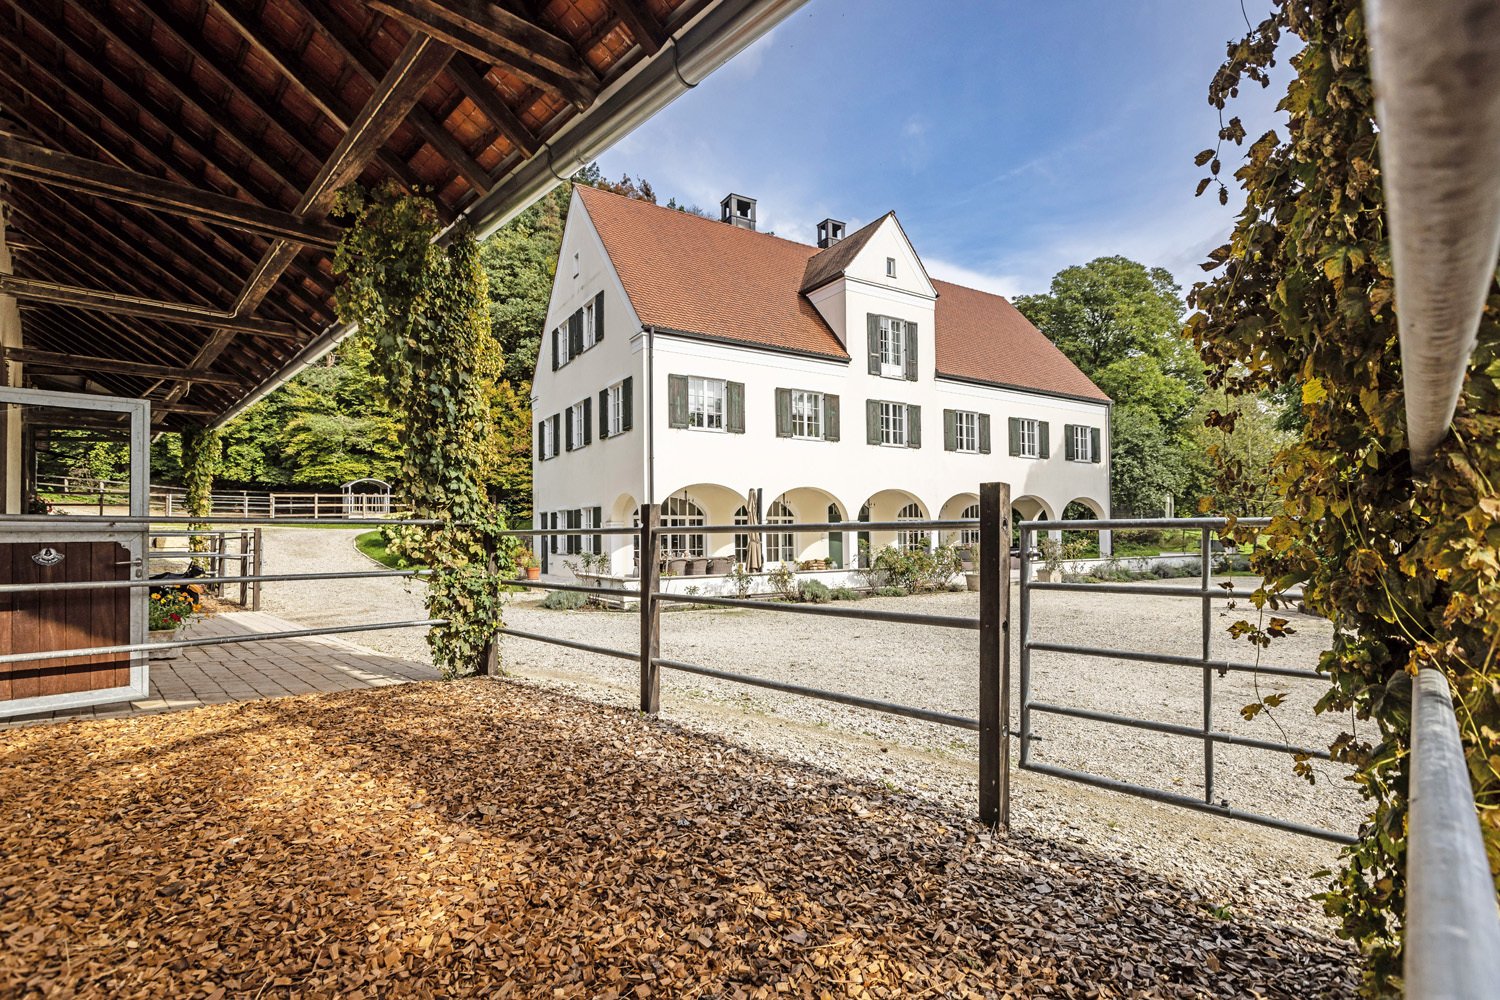 2422 germany, bavaria, luxury countryhouse with stables for sale